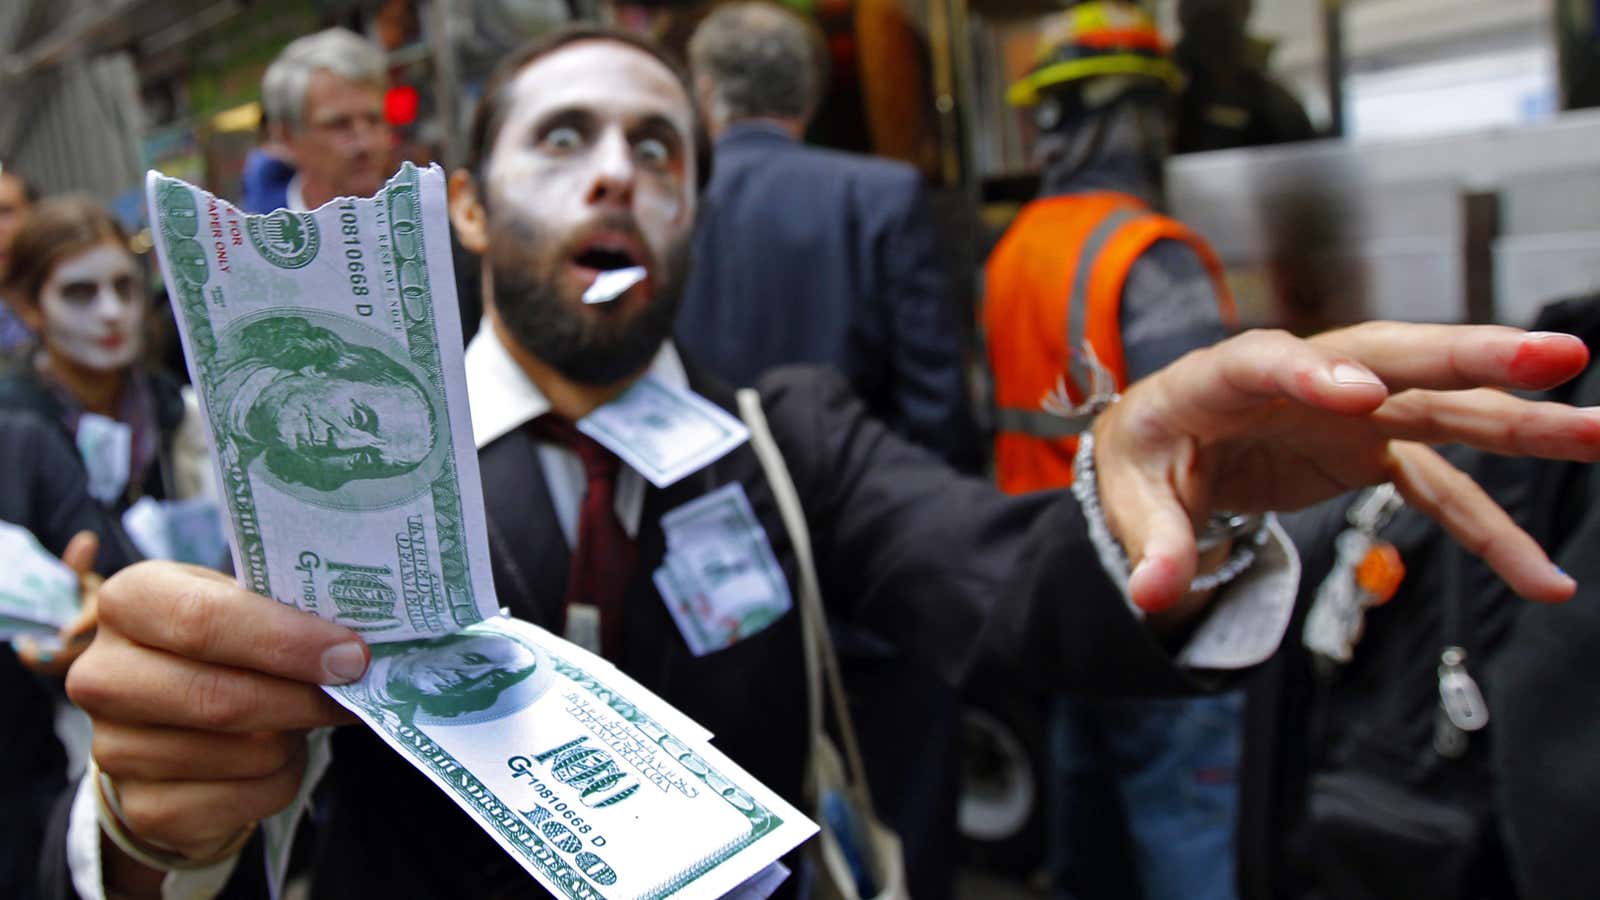 Zombie companies are occupying the global economy.